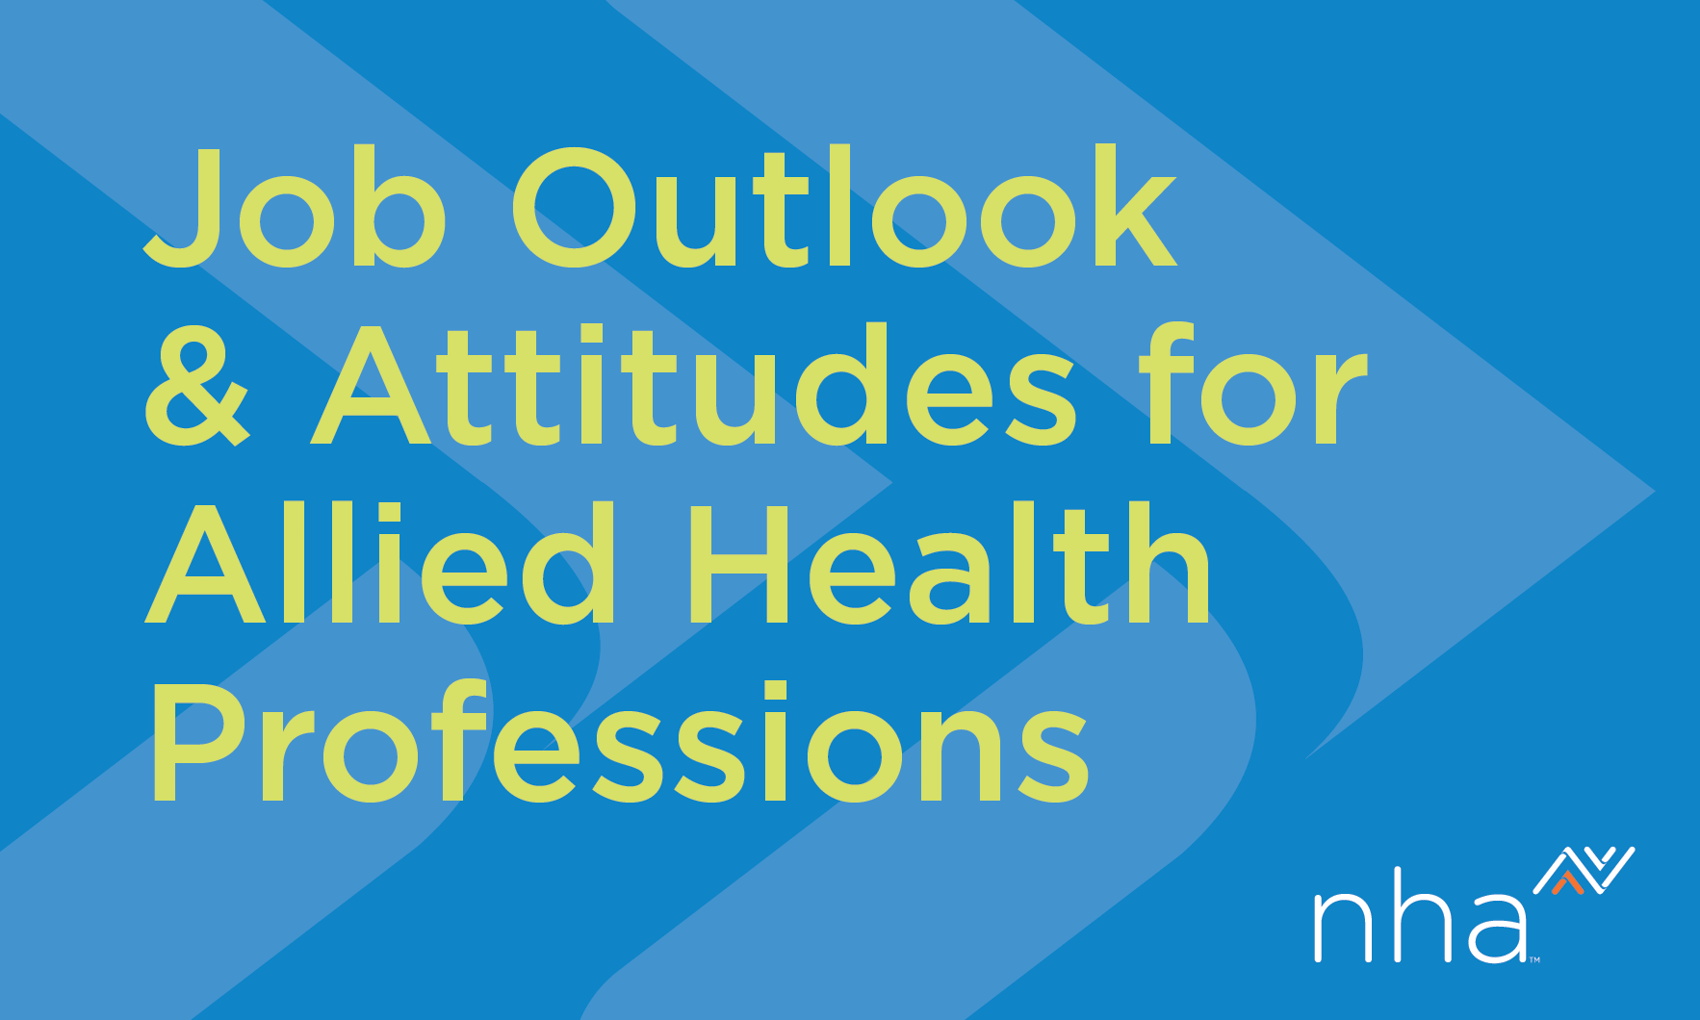 Job outlook & attitudes for allied health professions